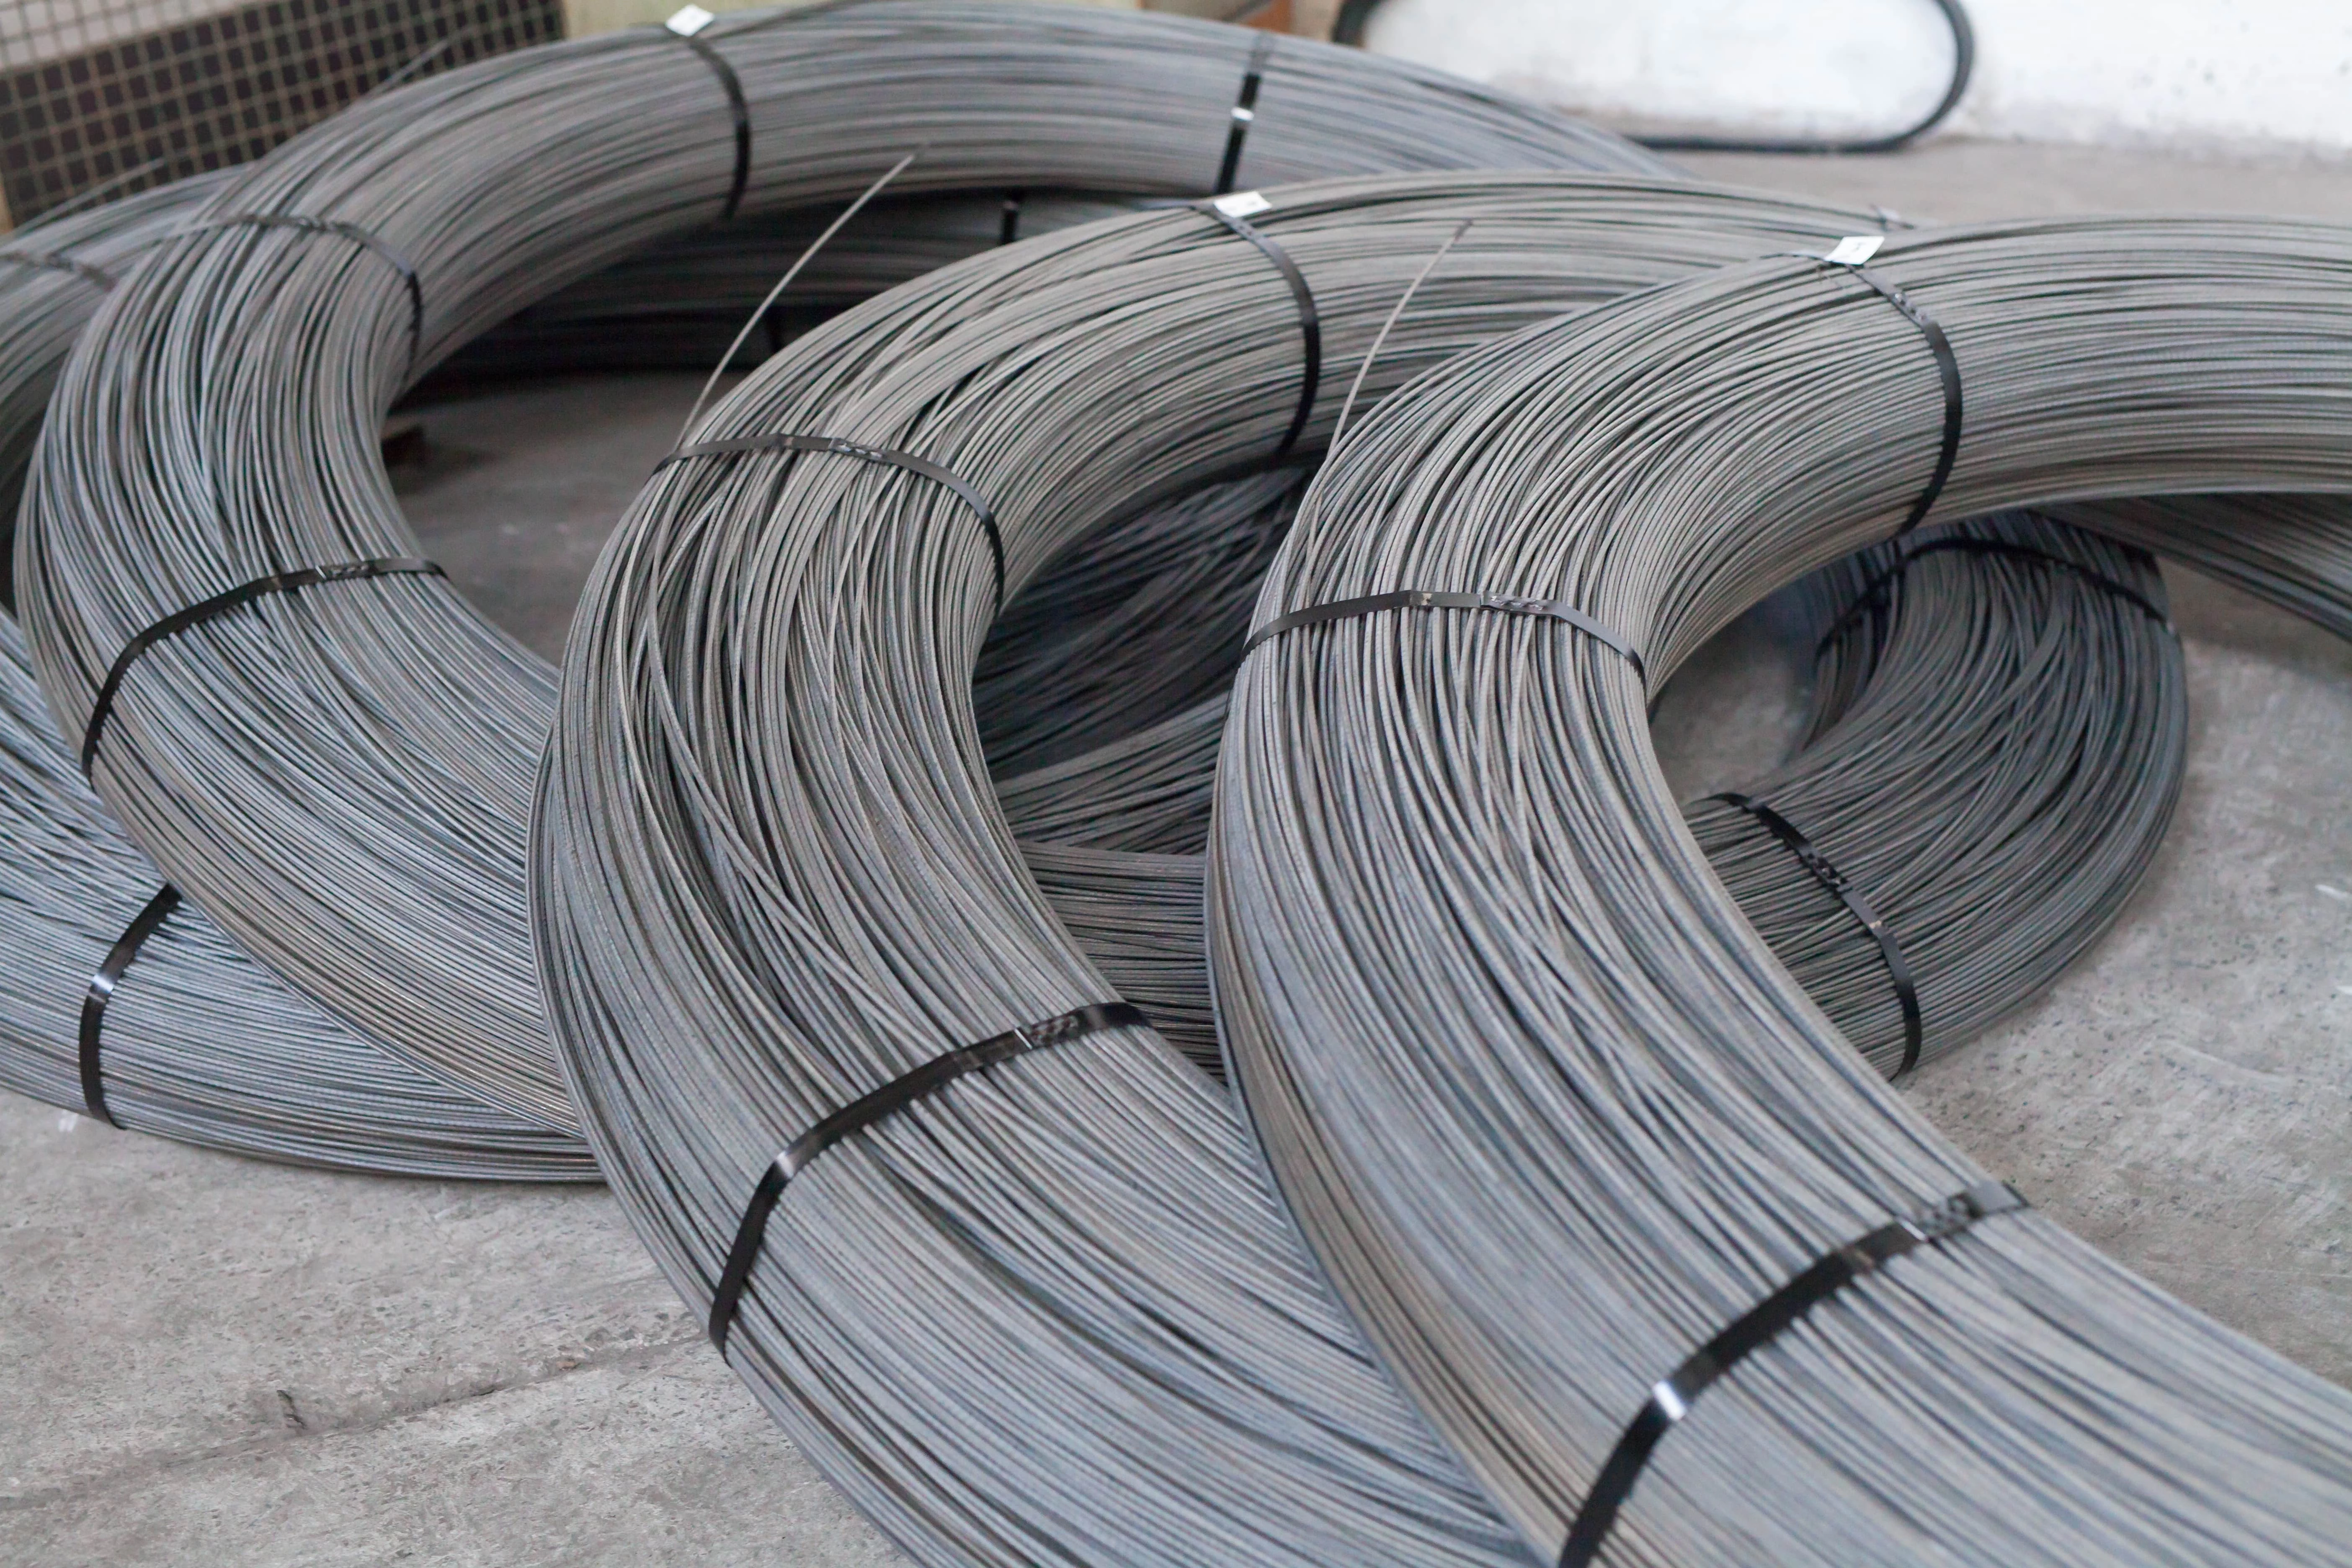 Product Category: Wire rods